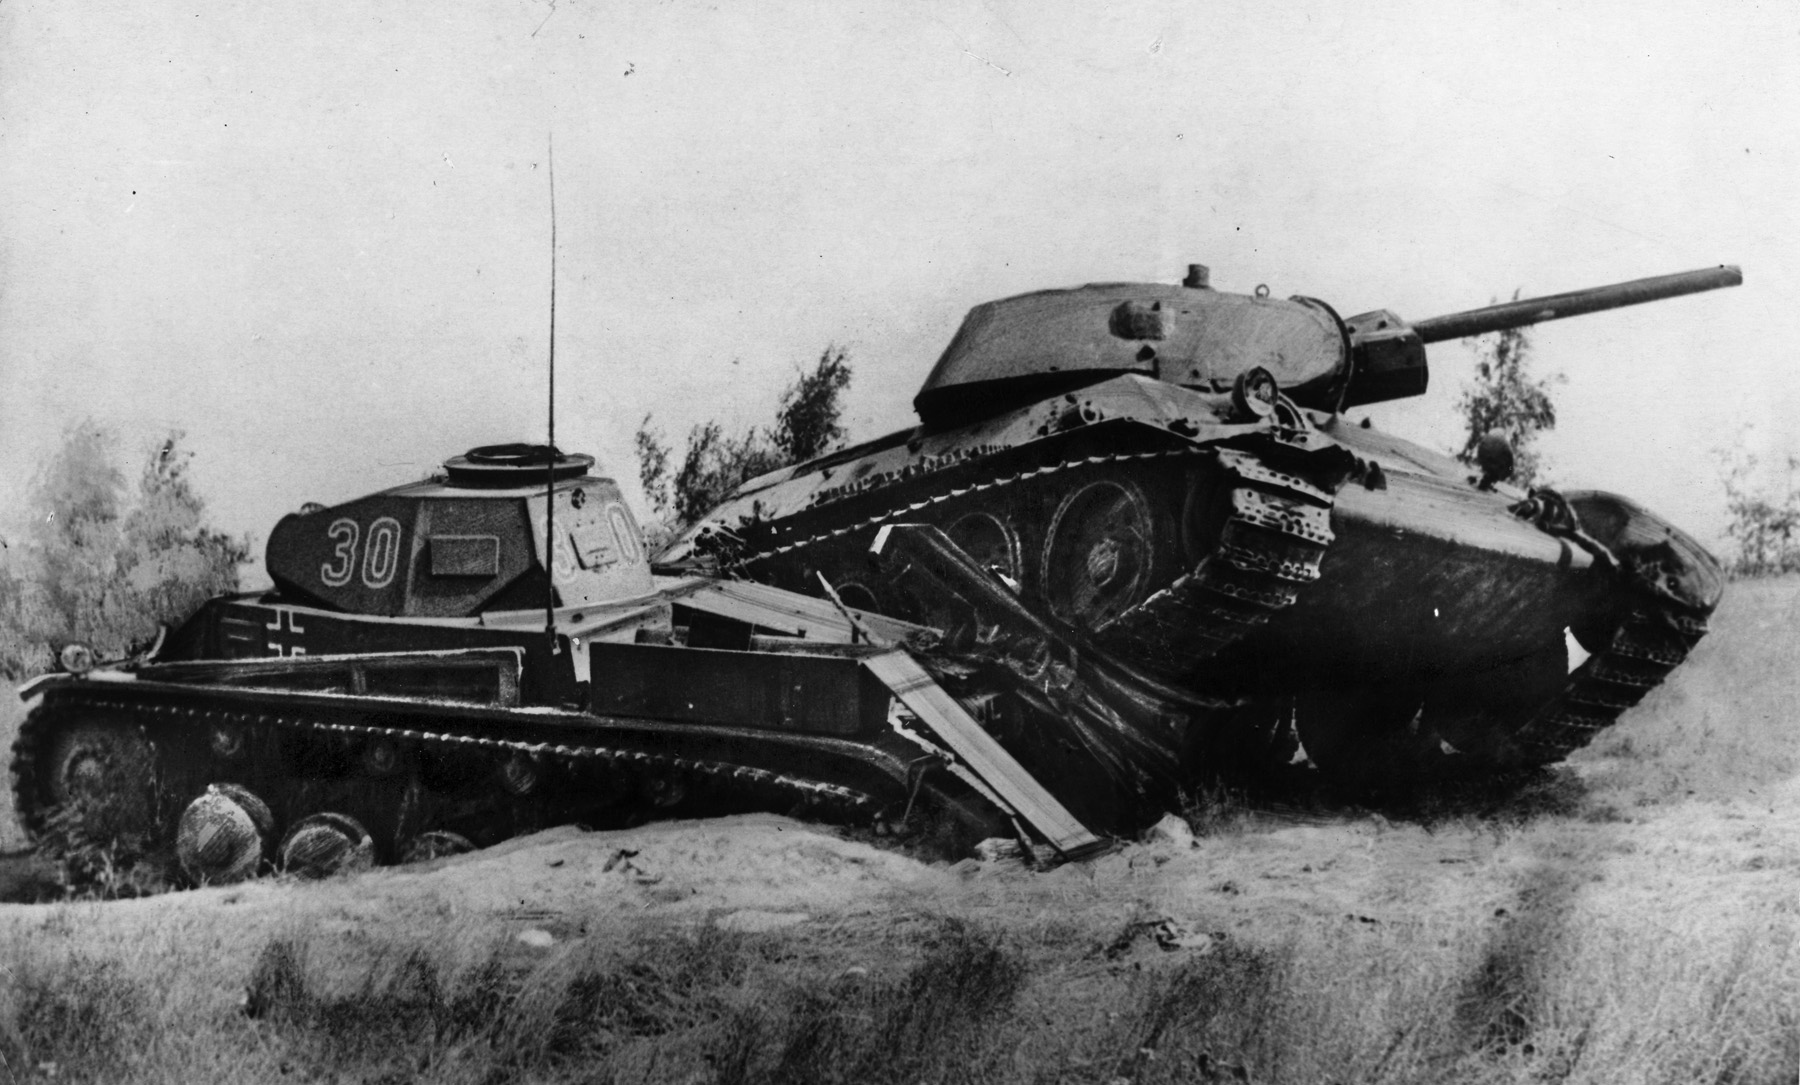 In this dramatic photograph taken in August 1941, a Soviet T-35 tank rolls across the flank of a disabled German tank somewhere in Russia. Soviet armored innovation produced the legendary T-34 medium tank, which helped turn the tide of the war in the East.